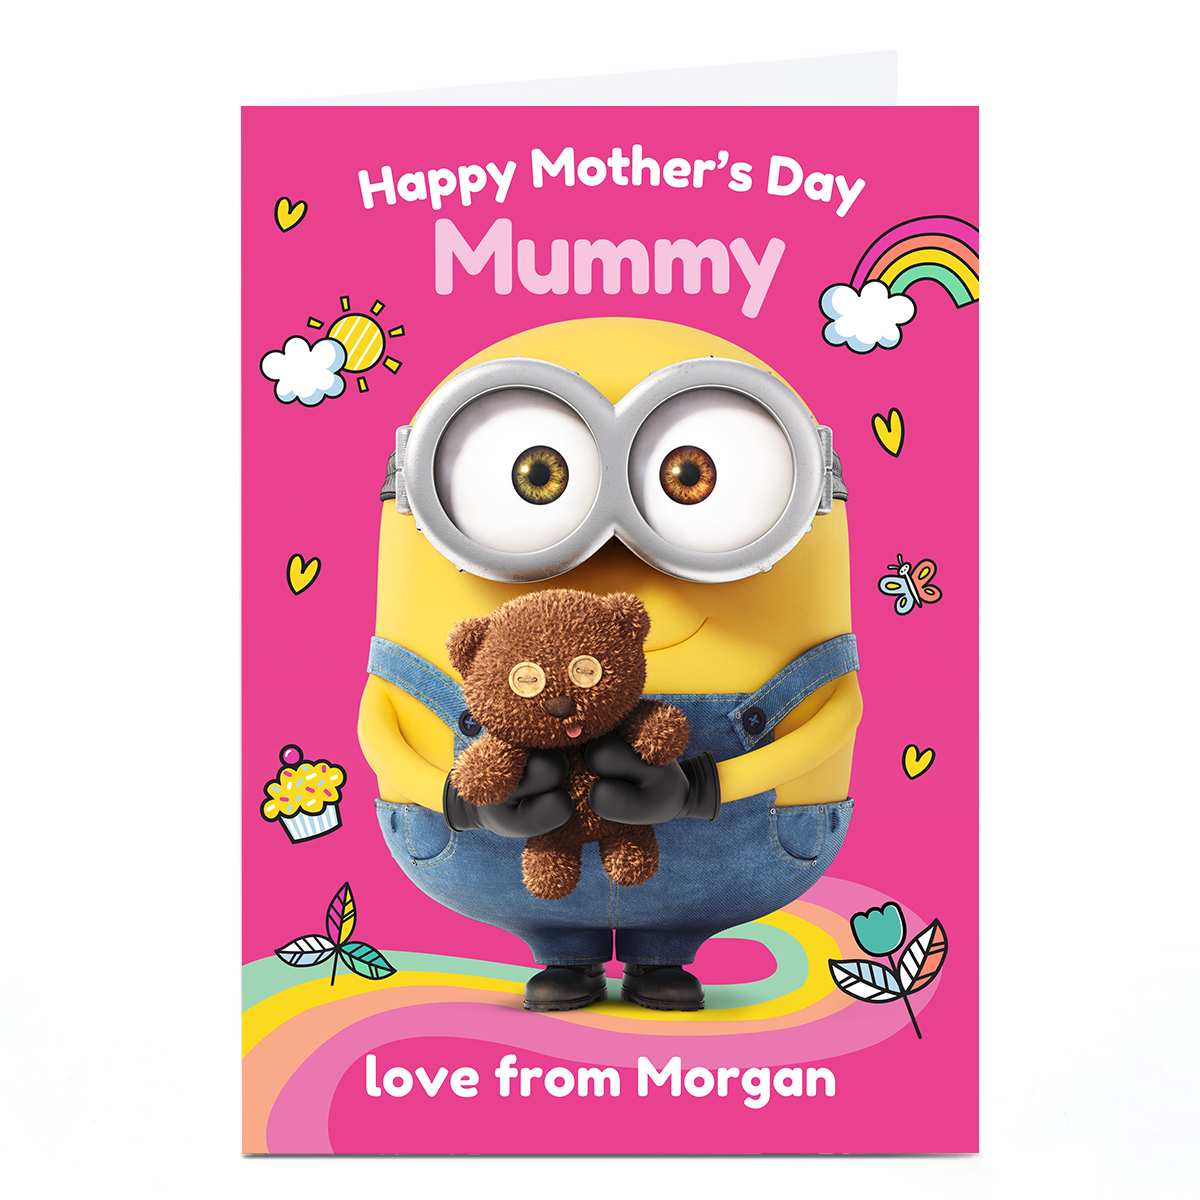 Personalised Minions Mother's Day Card - Mummy